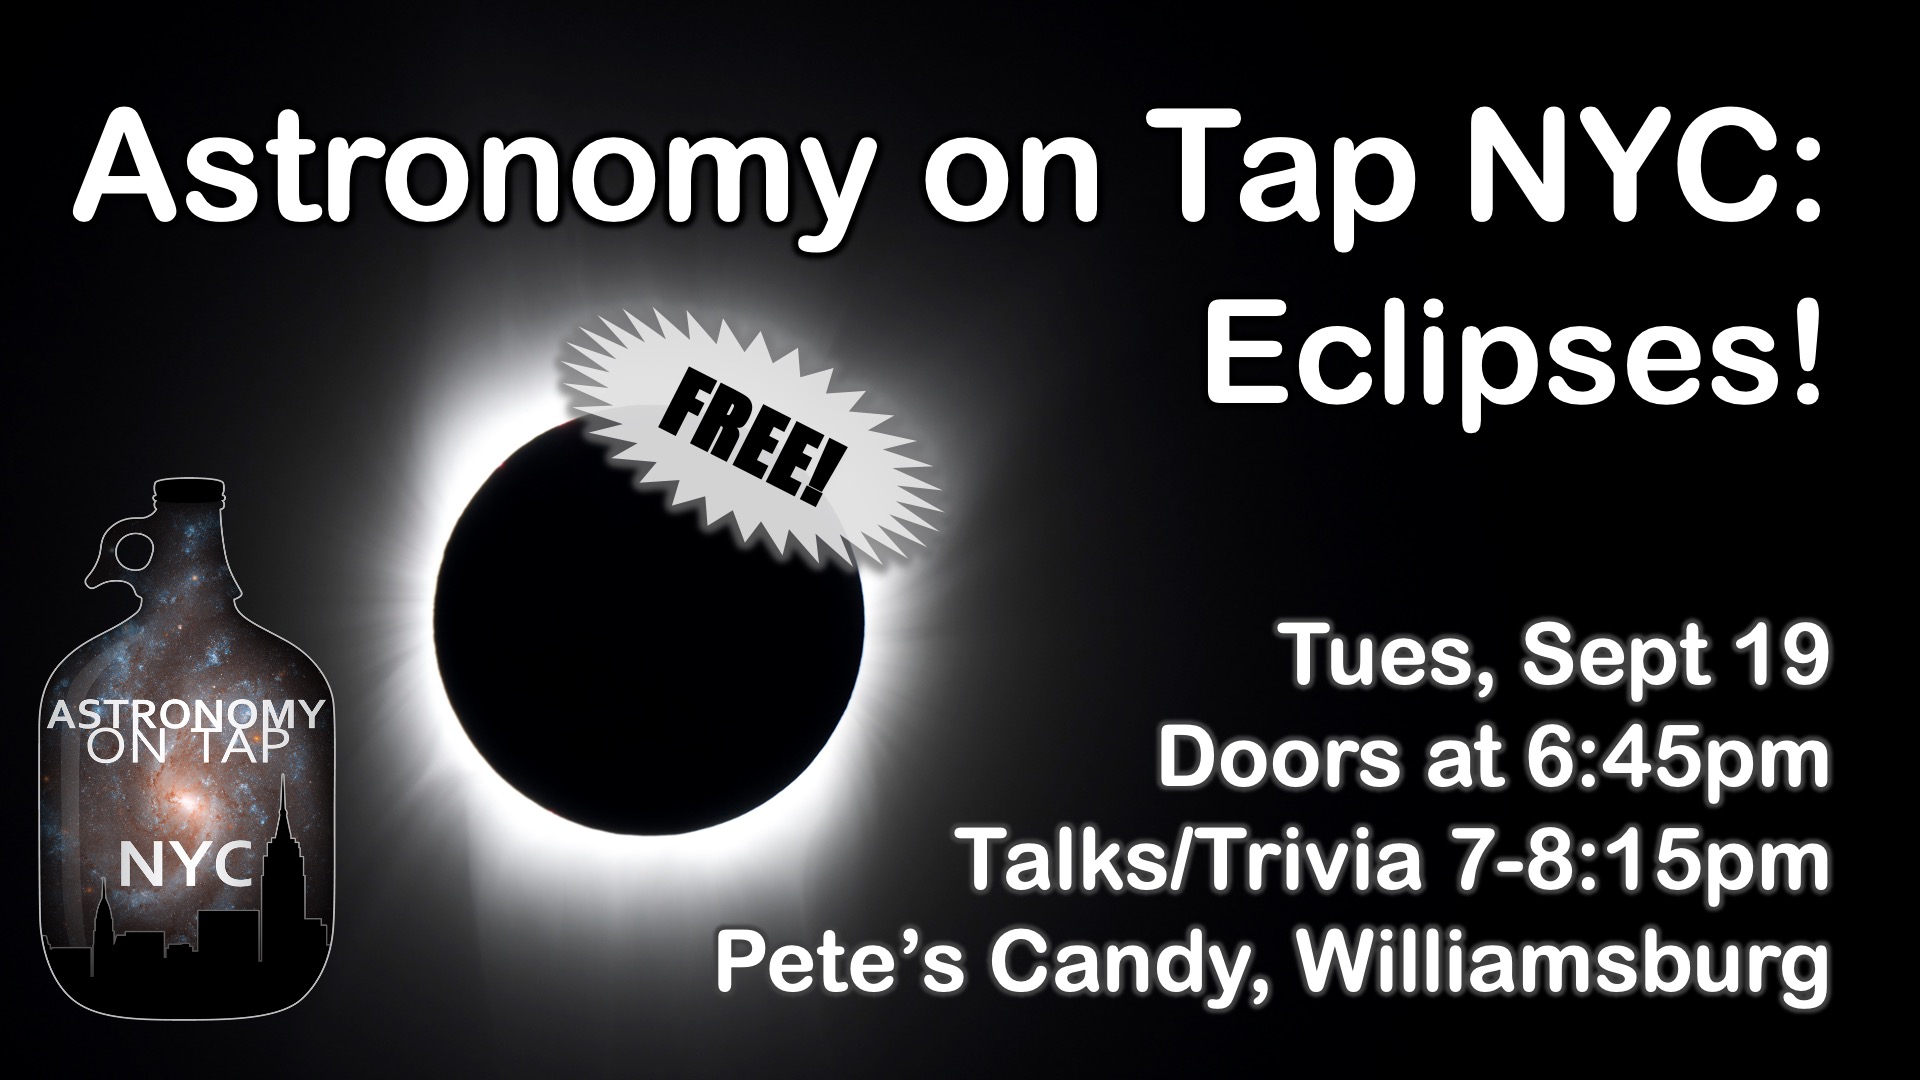 A black background with white writing and an image of an eclipsed sun, plus the NYC Astro on Tap "growler" logo. Text includes: Astronomy on Tap NYC - Eclipses! Tues, Sept 19. Doors at 6:45pm, Talks/Trivia 7-8:15pm, at Pete's Candy in Williamsburg.